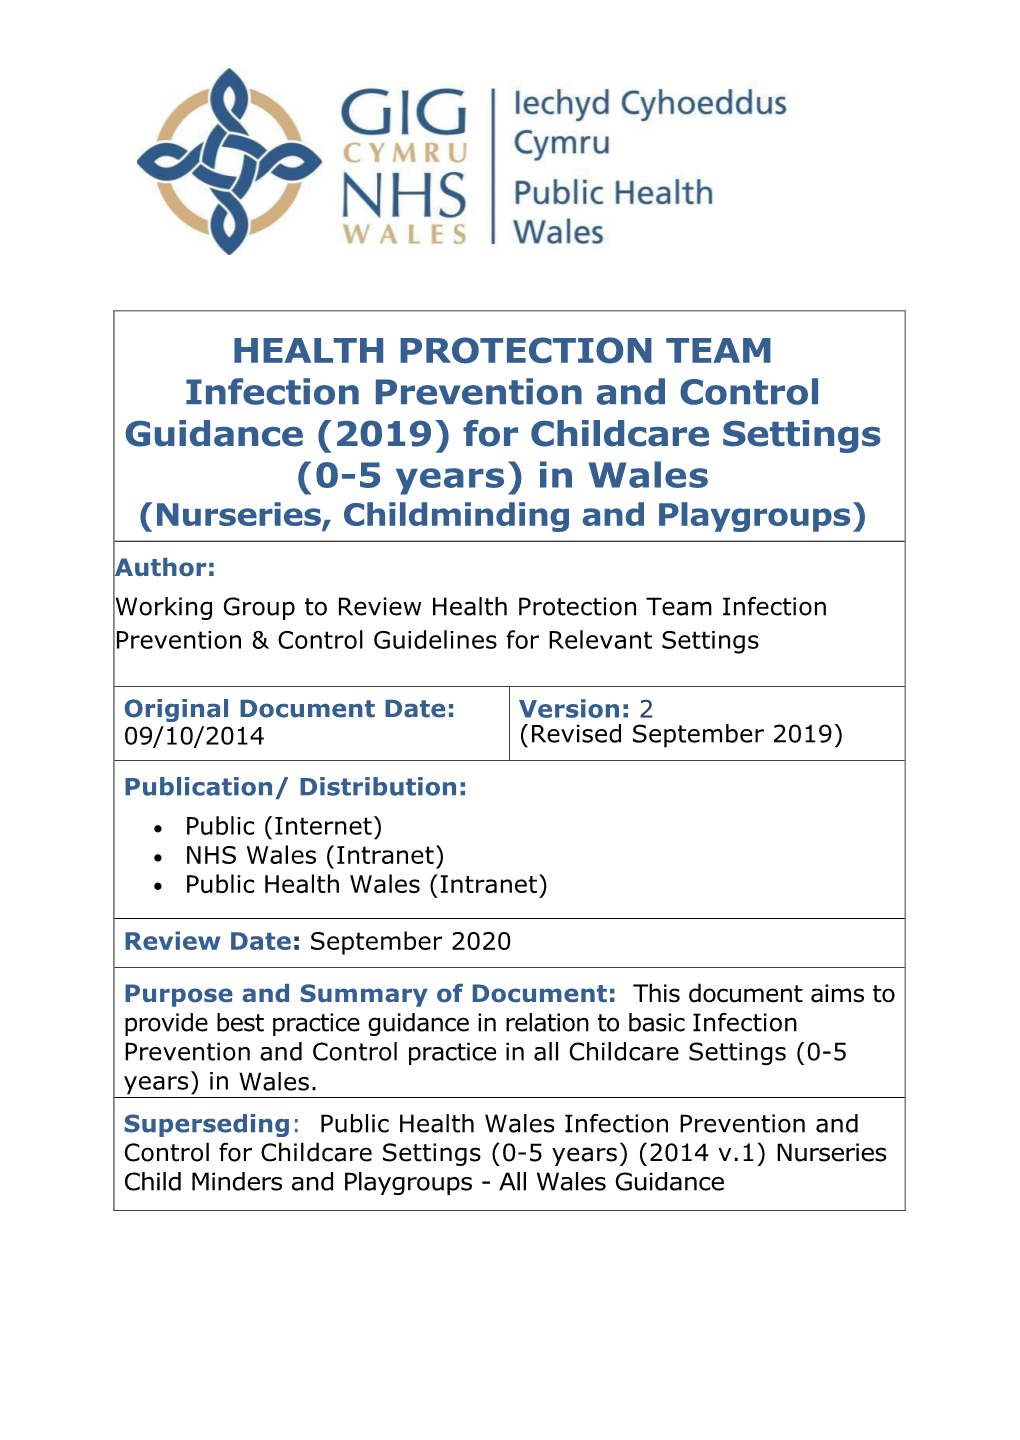 Infection Prevention and Control Guidance (2019) for Childcare Settings (0-5 Years) in Wales (Nurseries, Childminding and Playgroups)